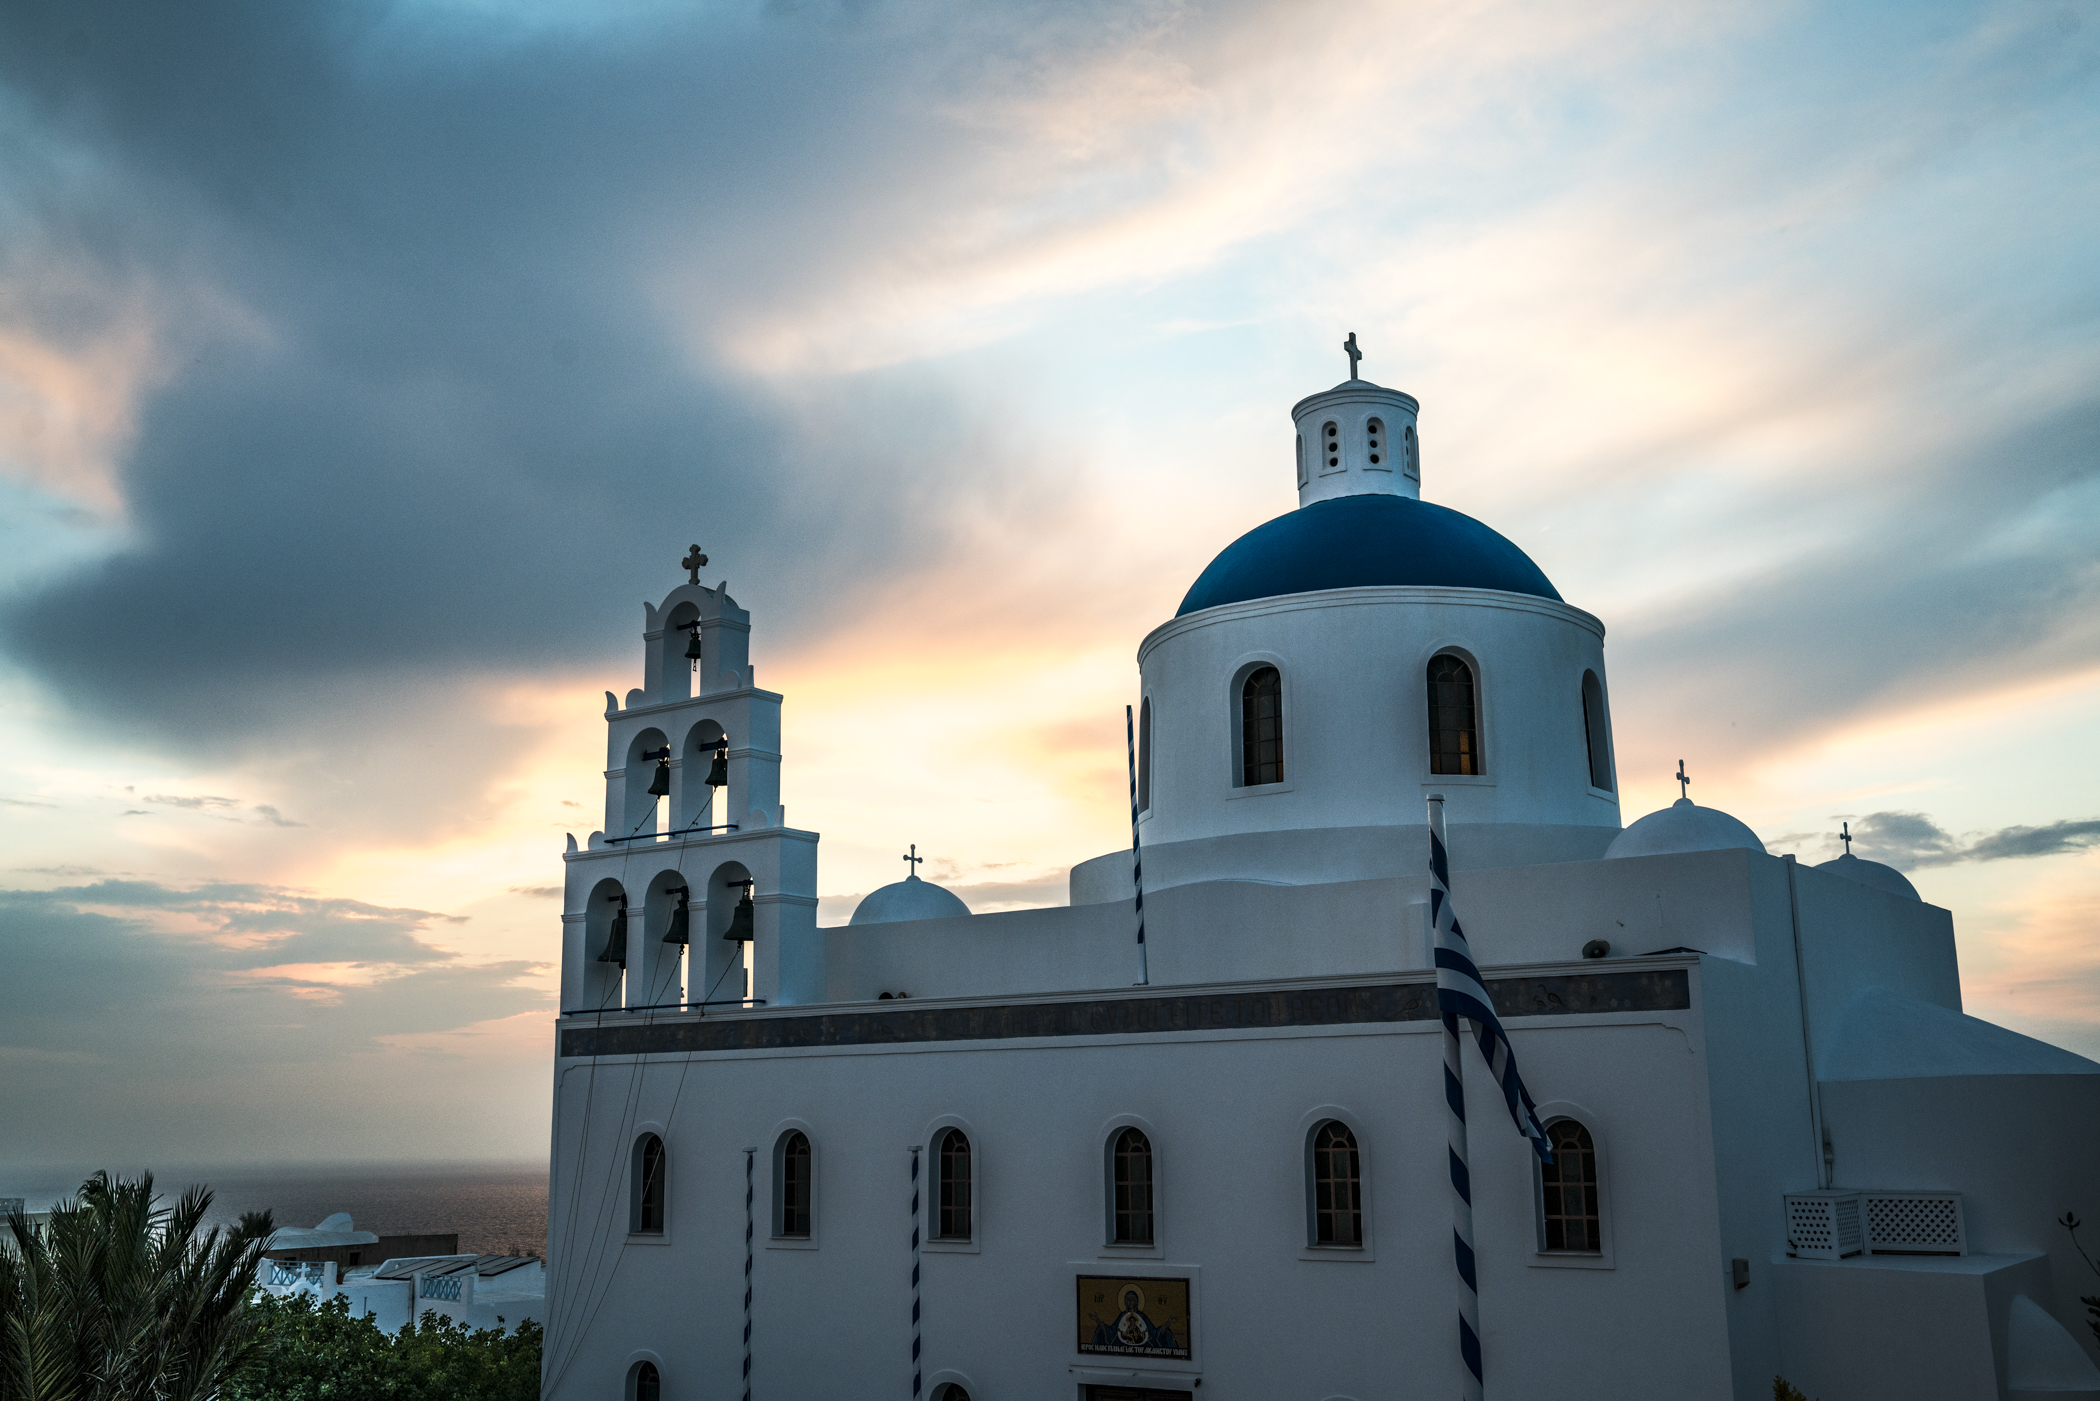 Photo Tips and Camera Settings for Santorini, Greece from Me Ra Koh and Brian Tausend, Sony Artisan of Imagery